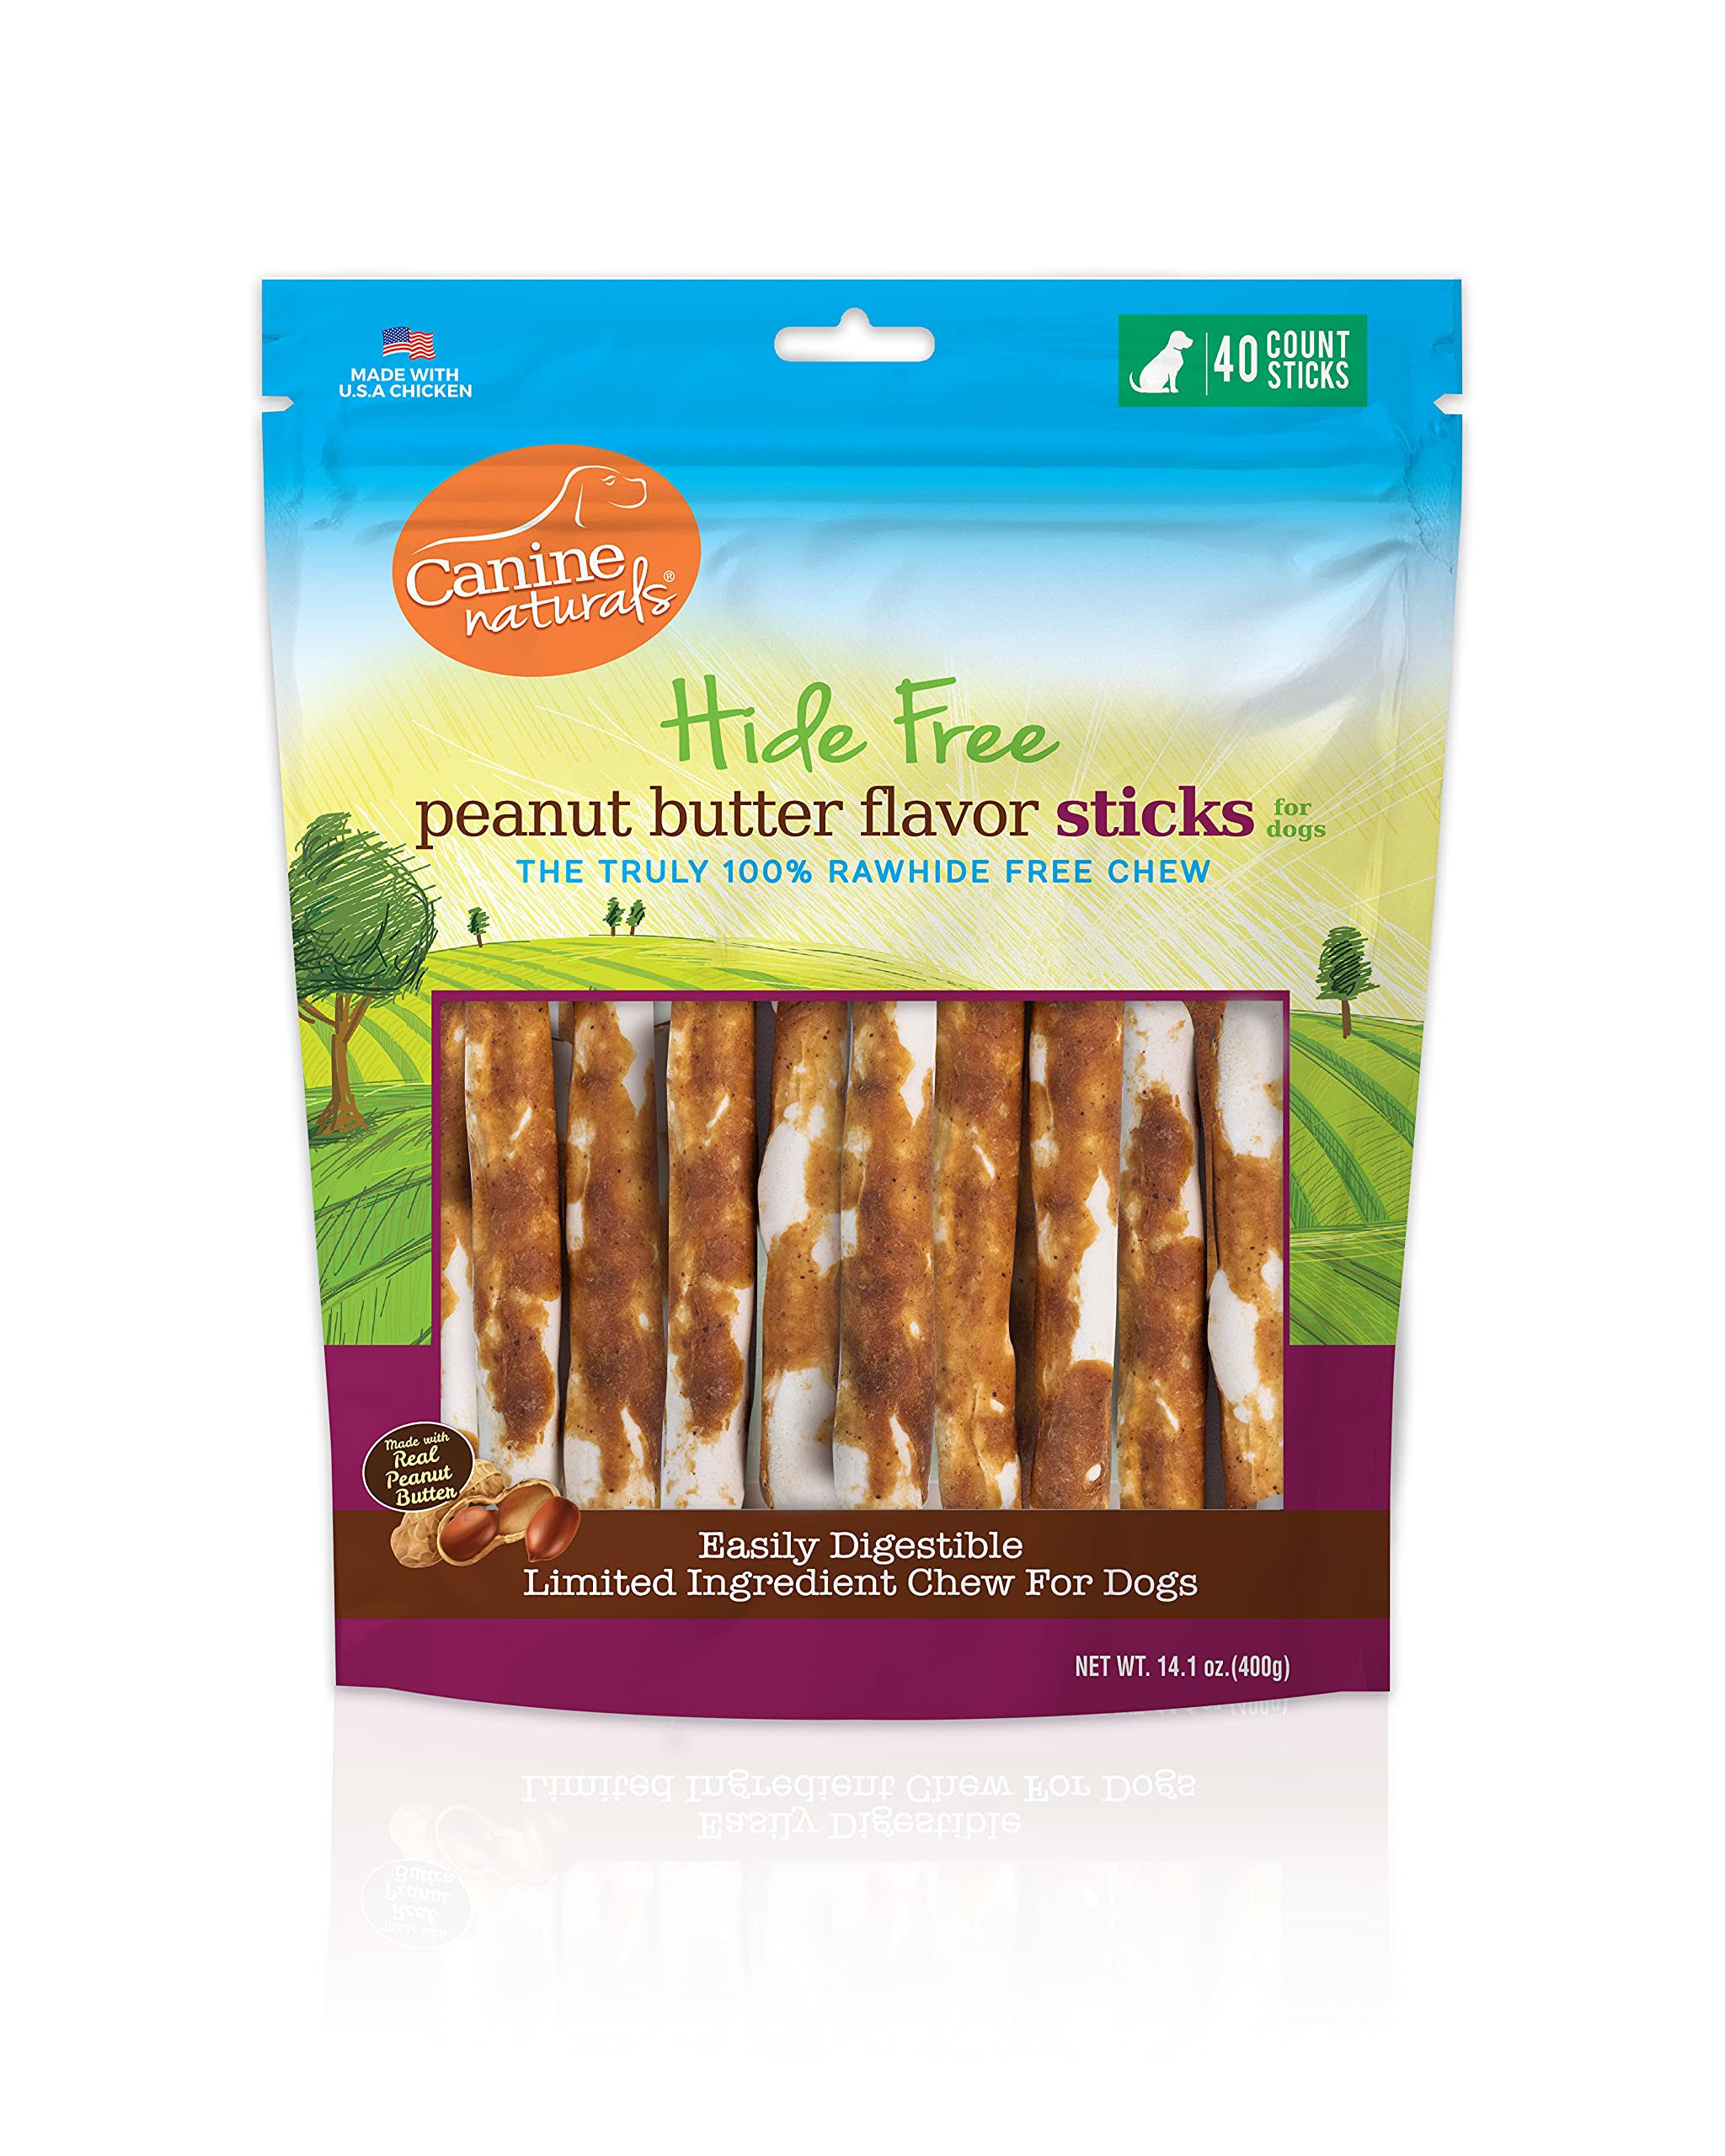 Canine Naturals Hide Free 5-Inch Peanut Butter Flavor Stick Dog Chew, 40 Count